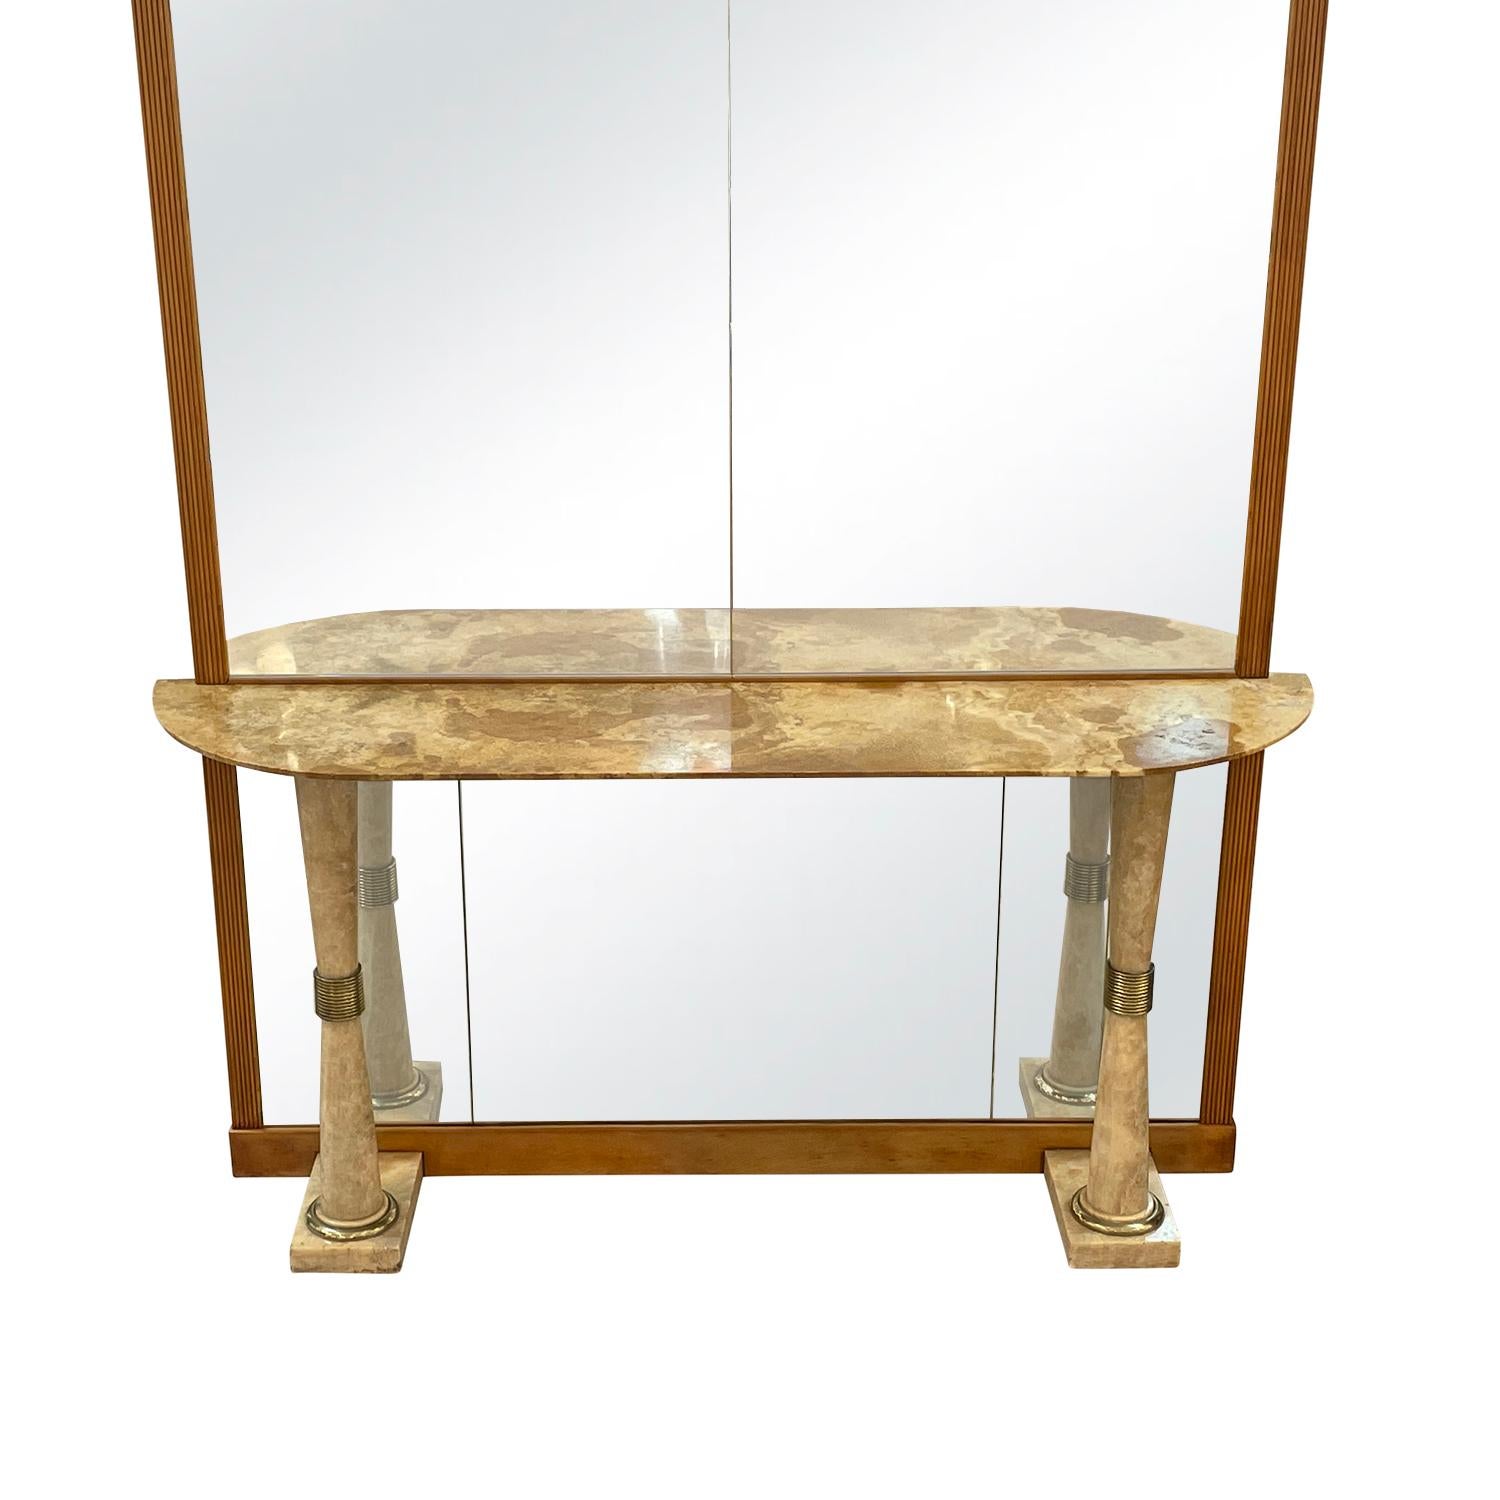 20th Century Italian Mid-Century Modern Marble Console Table & Glass Wall Mirror In Good Condition For Sale In West Palm Beach, FL